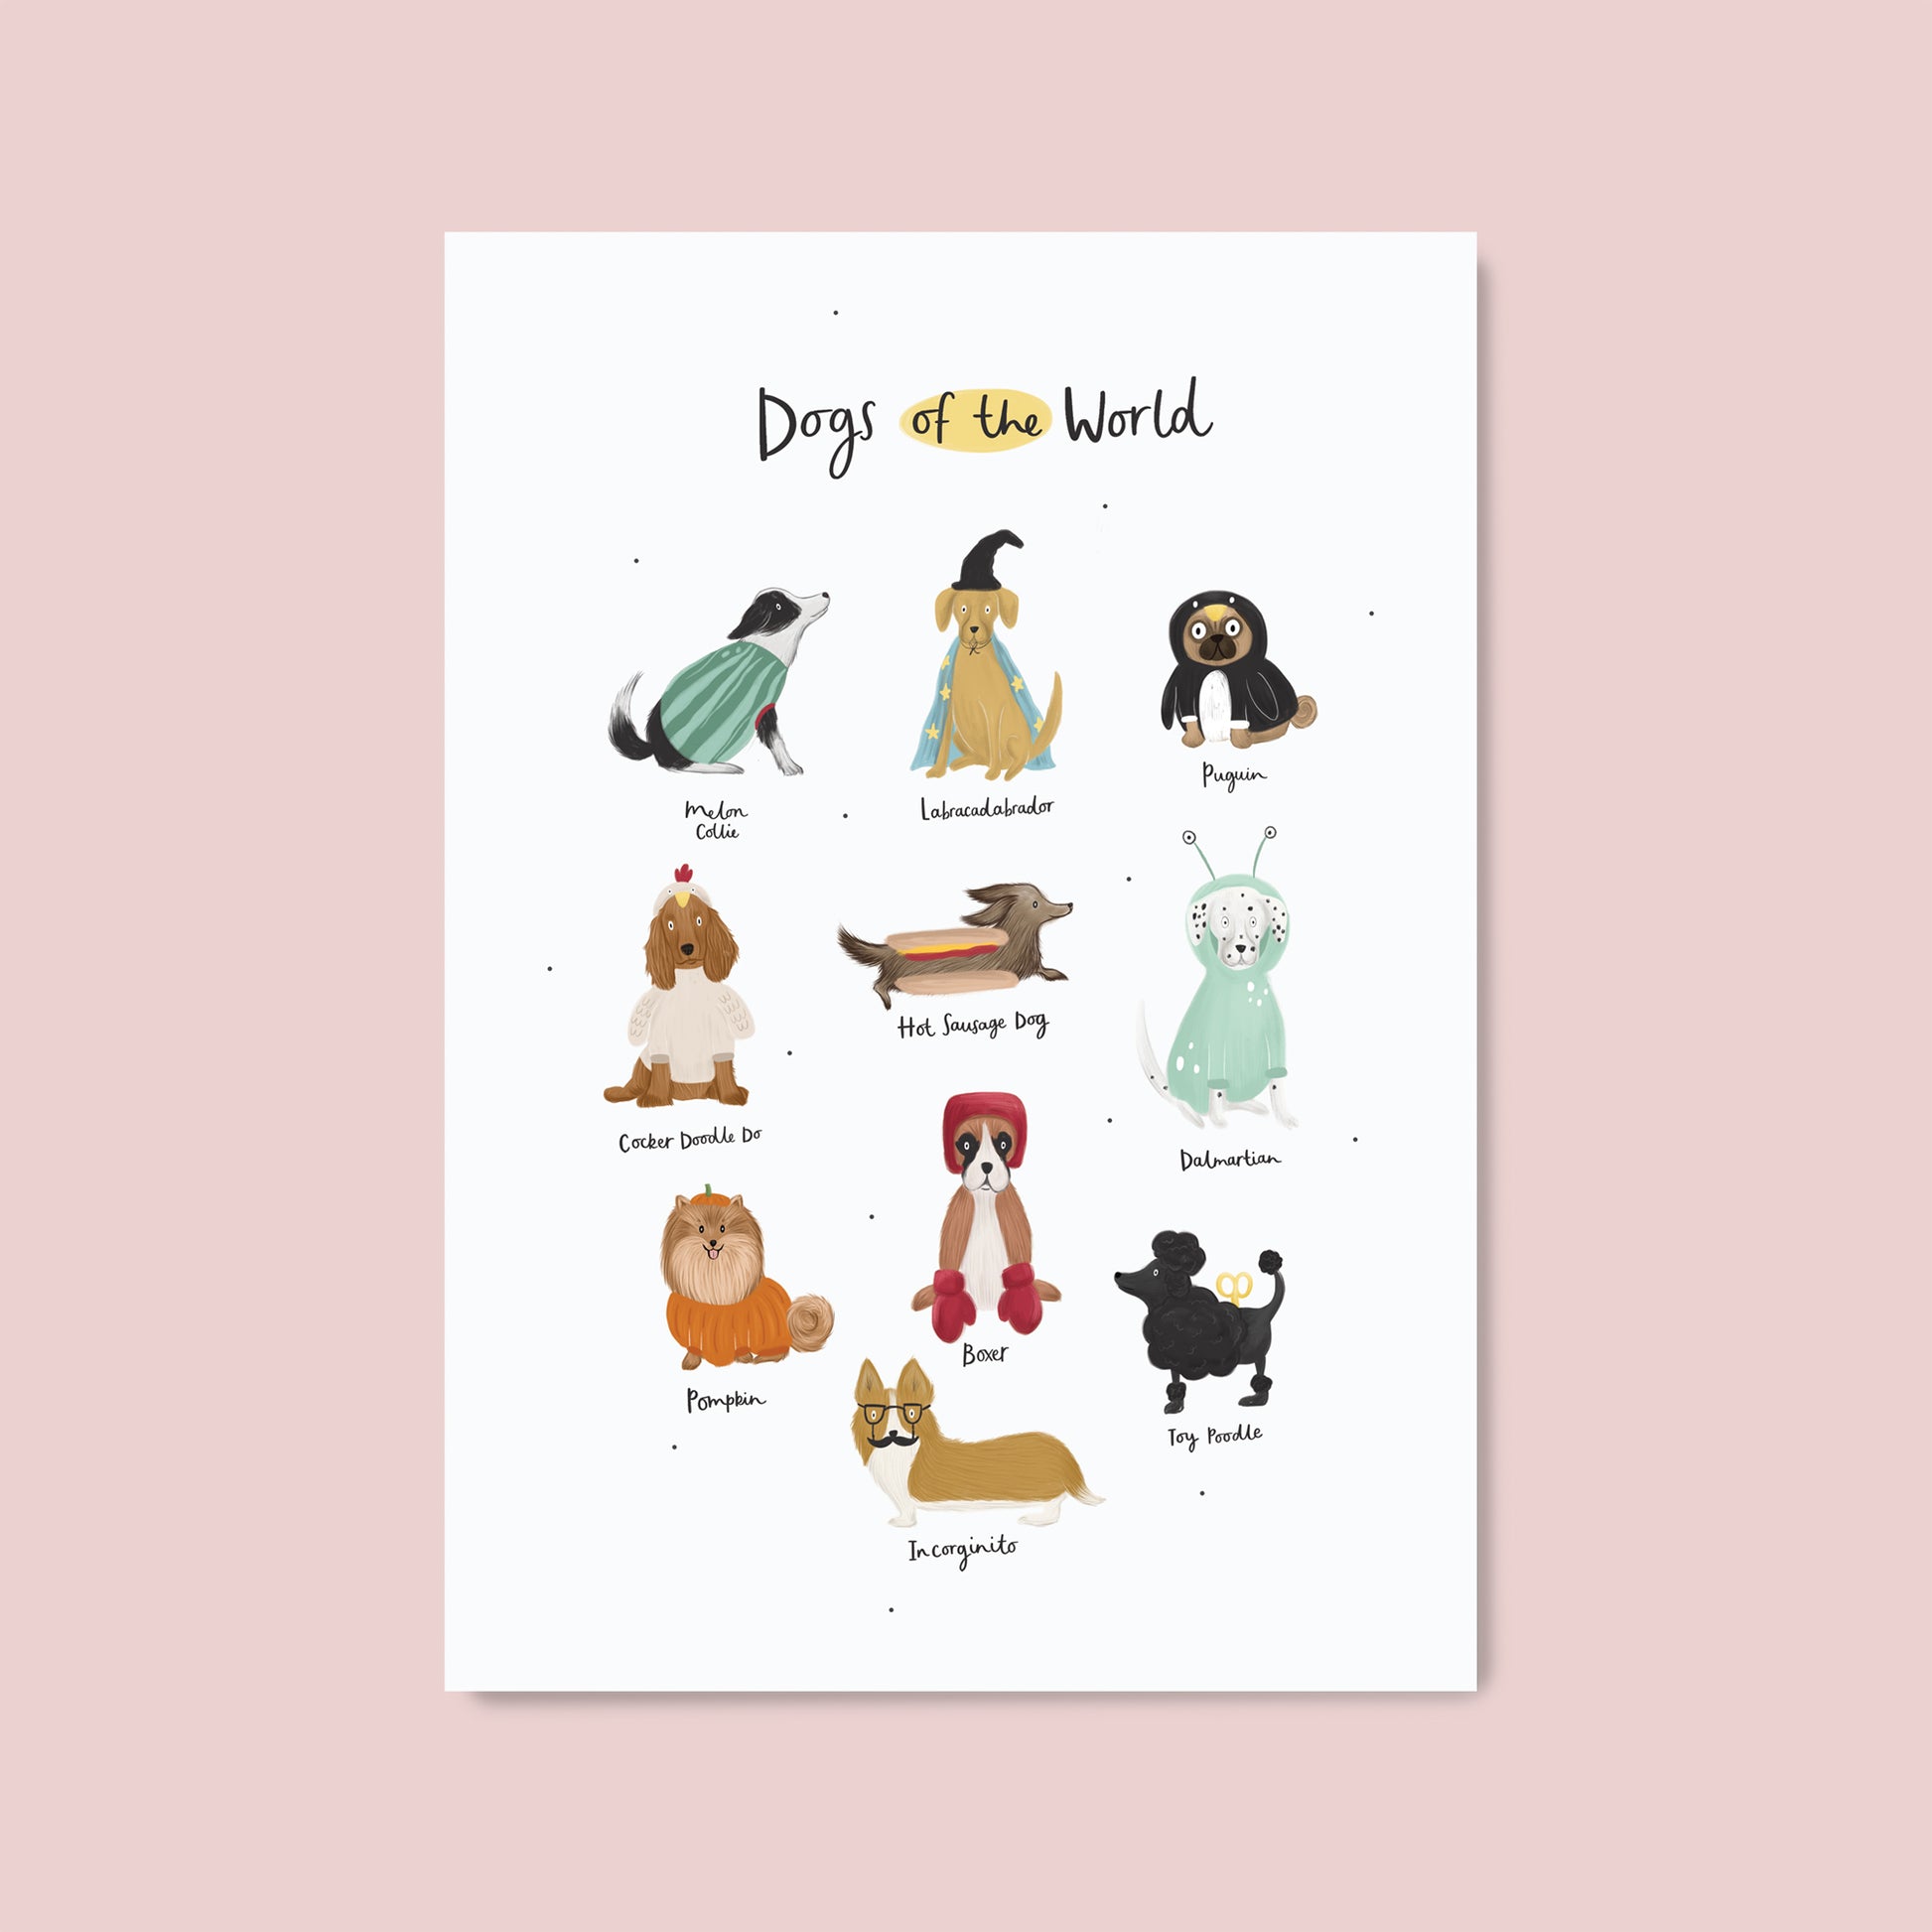 Dogs of the world children's art print featuring illustrations of dog puns by Abbie Imagine